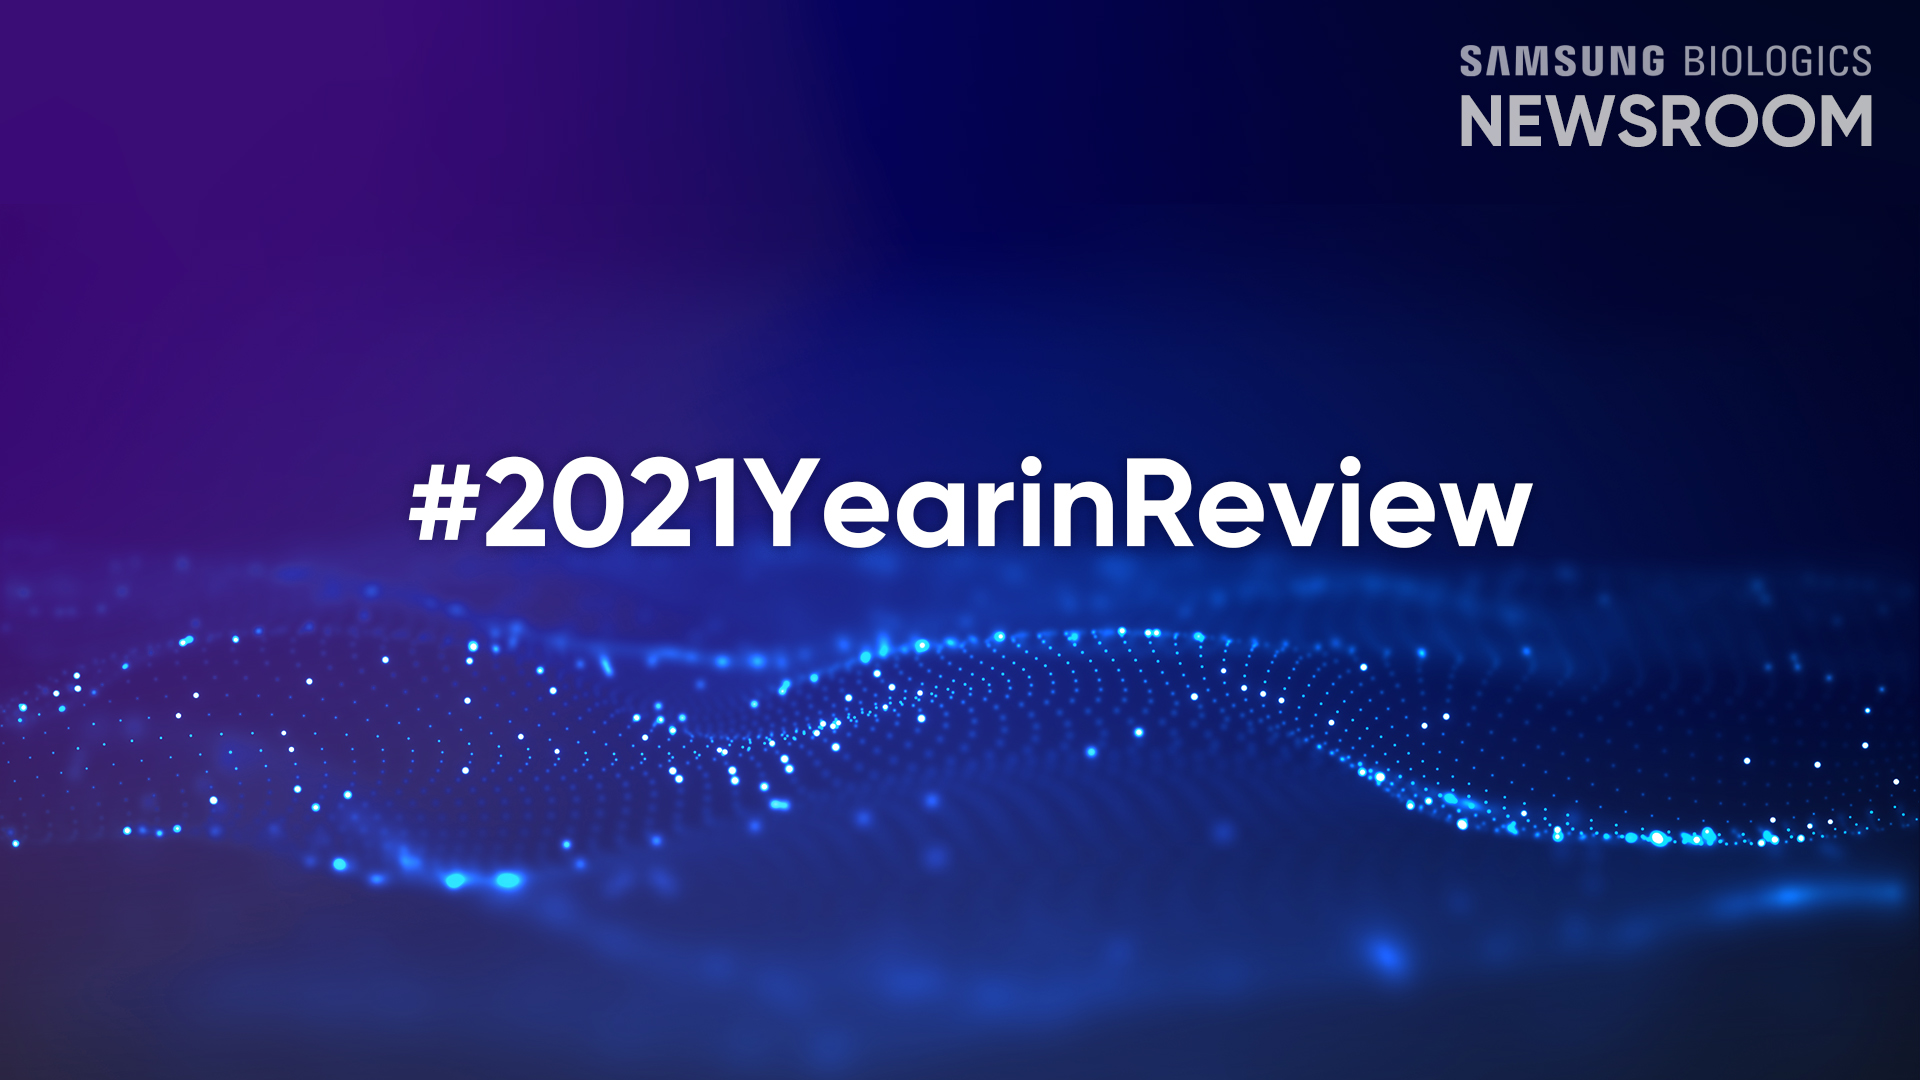 Samsung Biologics 2021 Year in Review